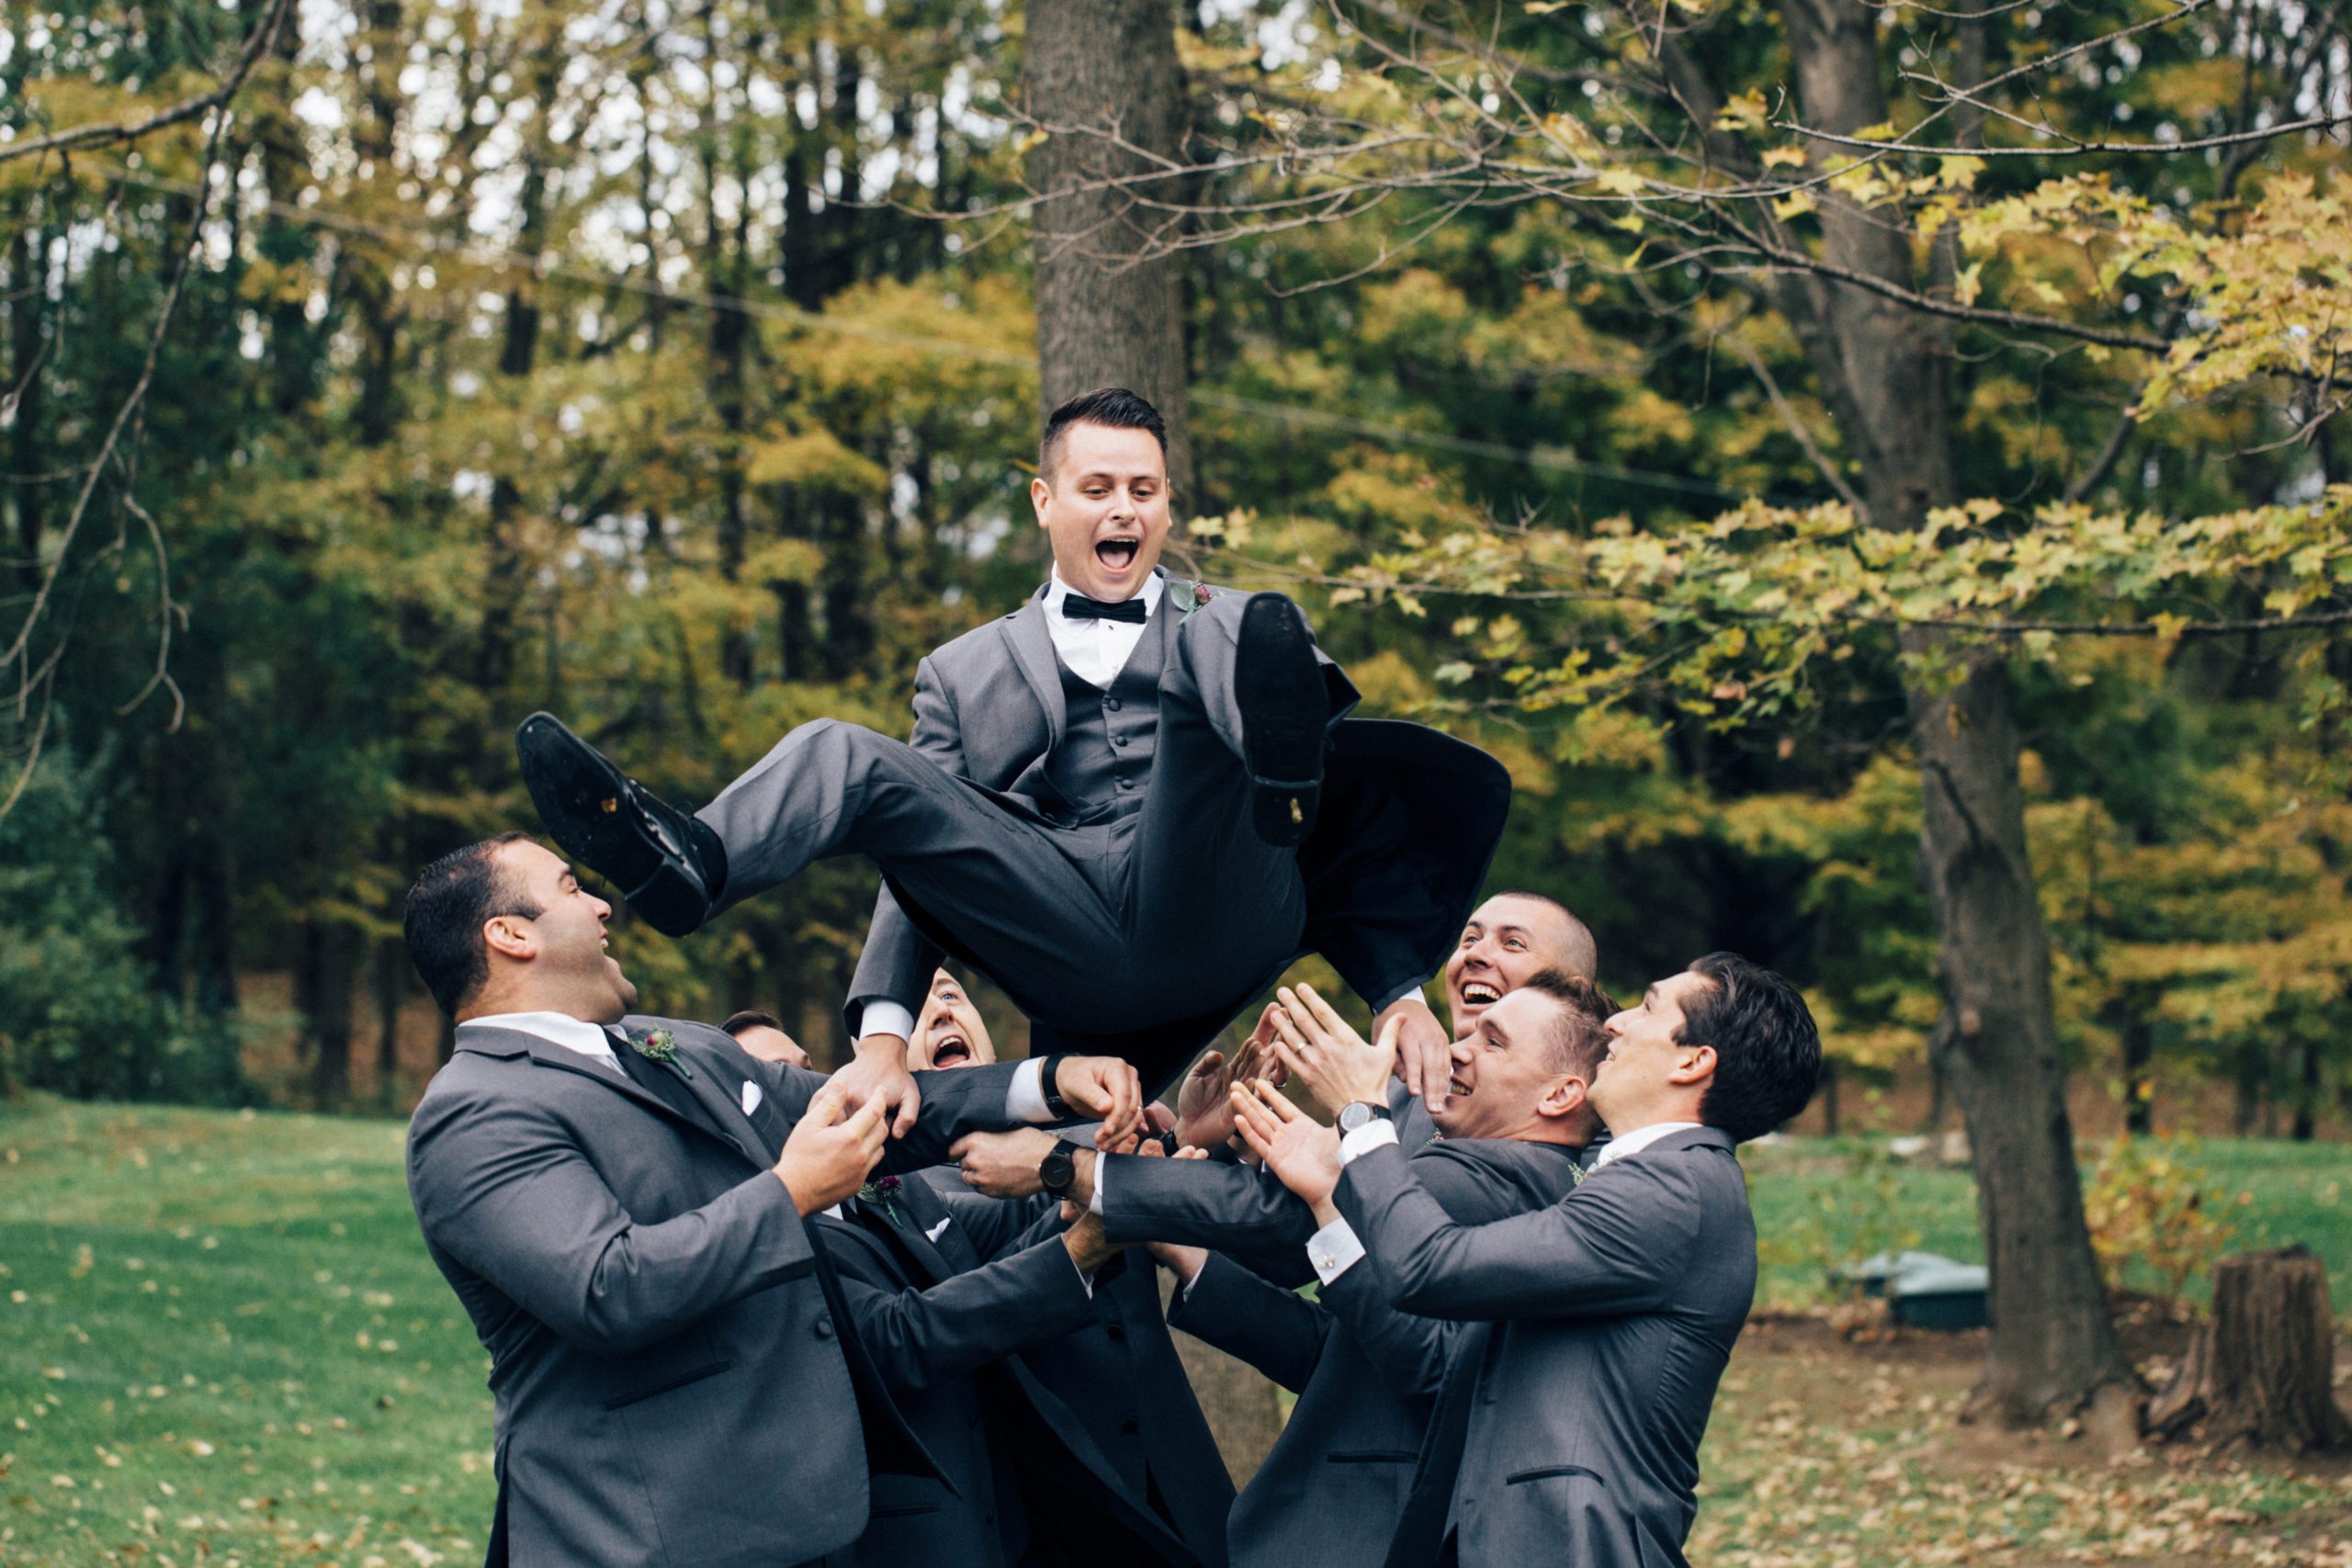 11 Quirky Candid Wedding Photos And Ideas For Your D-Day